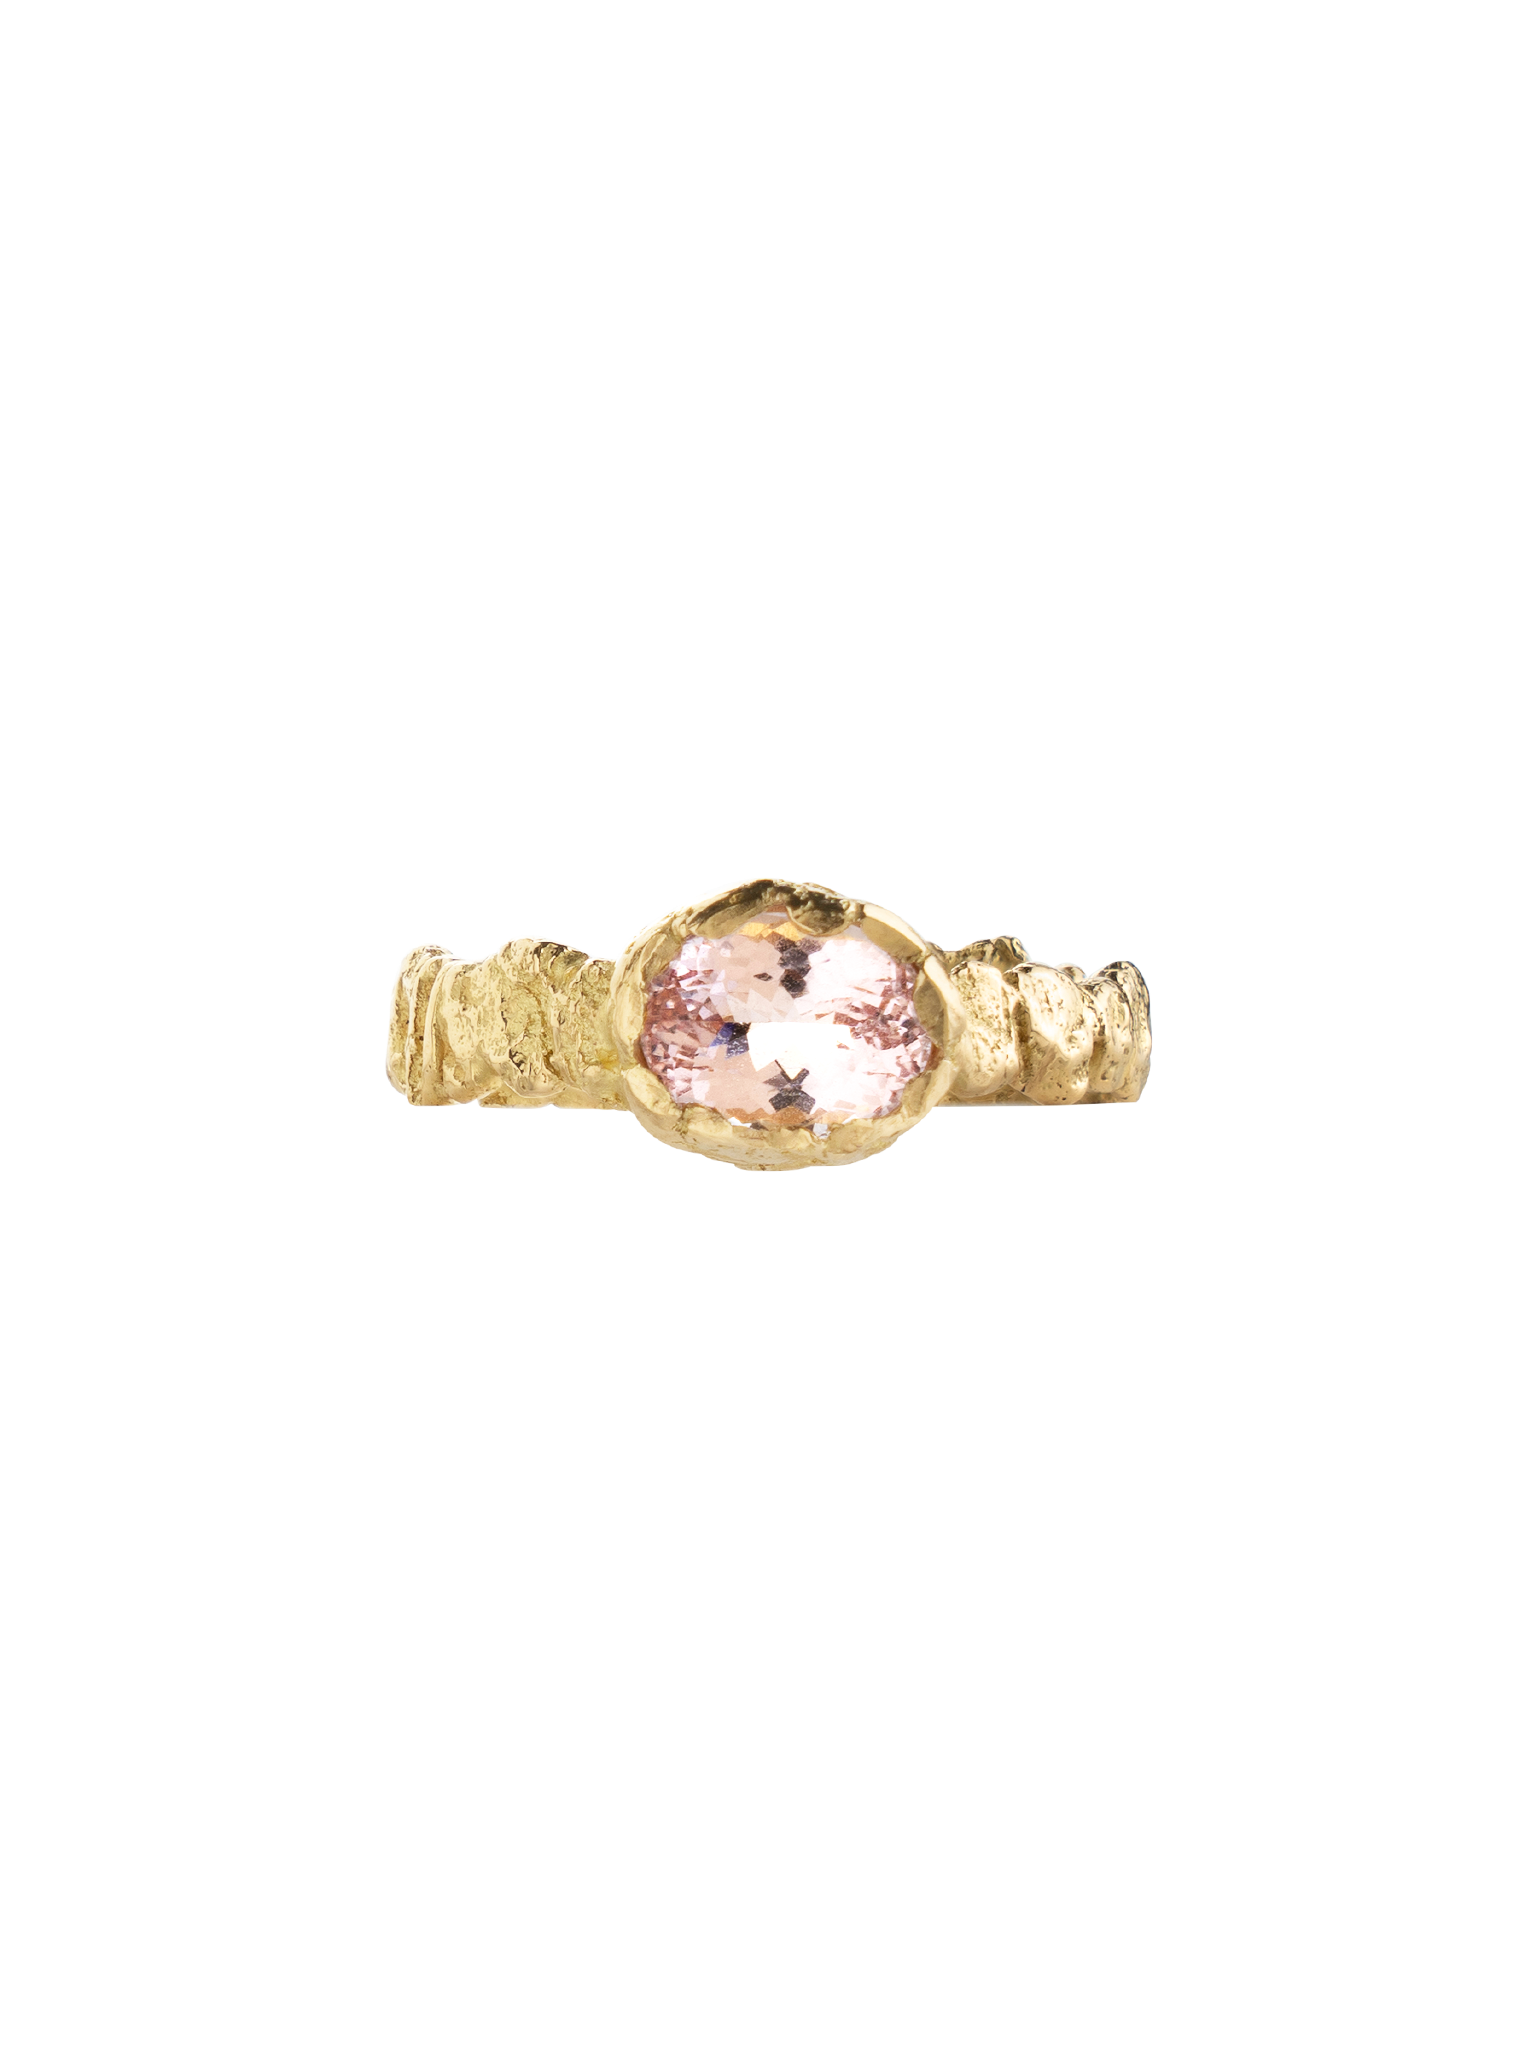 Tendresse sauvage ring